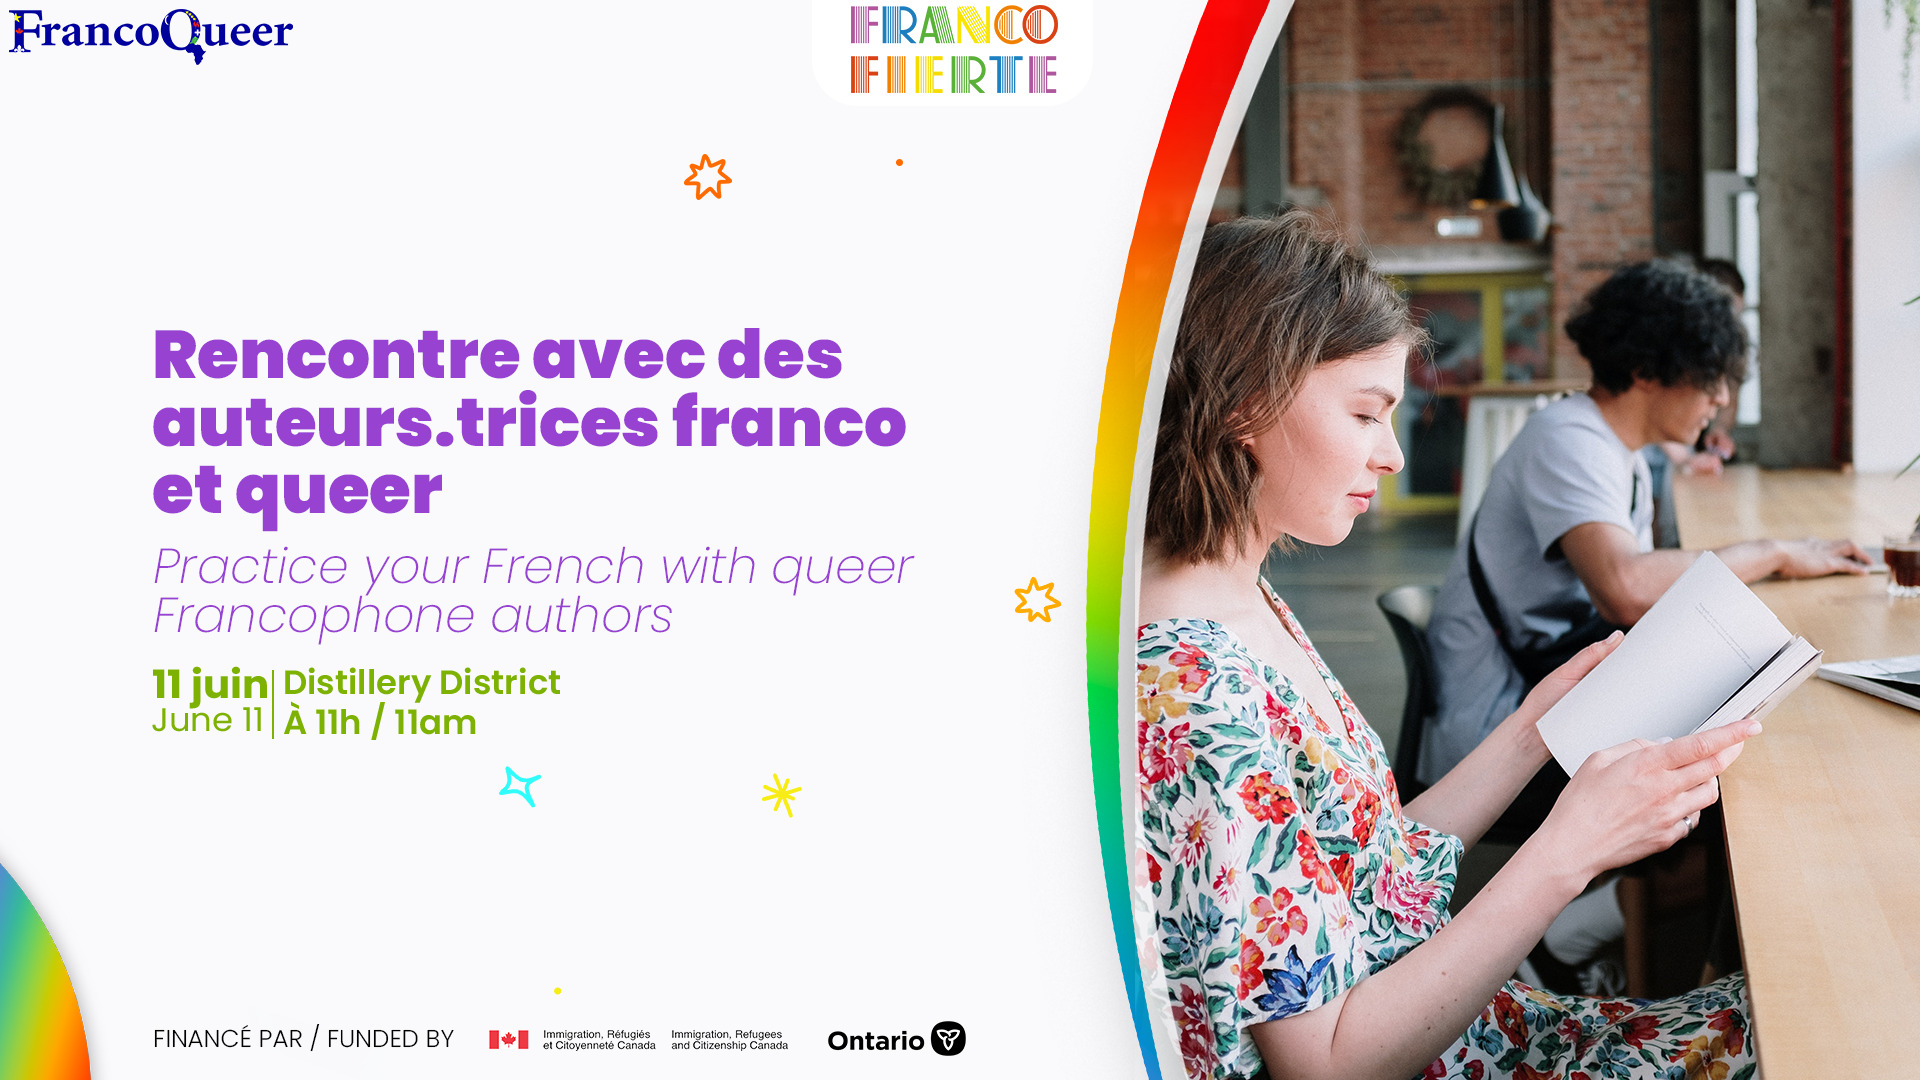 FrancoQueer - Practice your French with queer Francophone authors Event